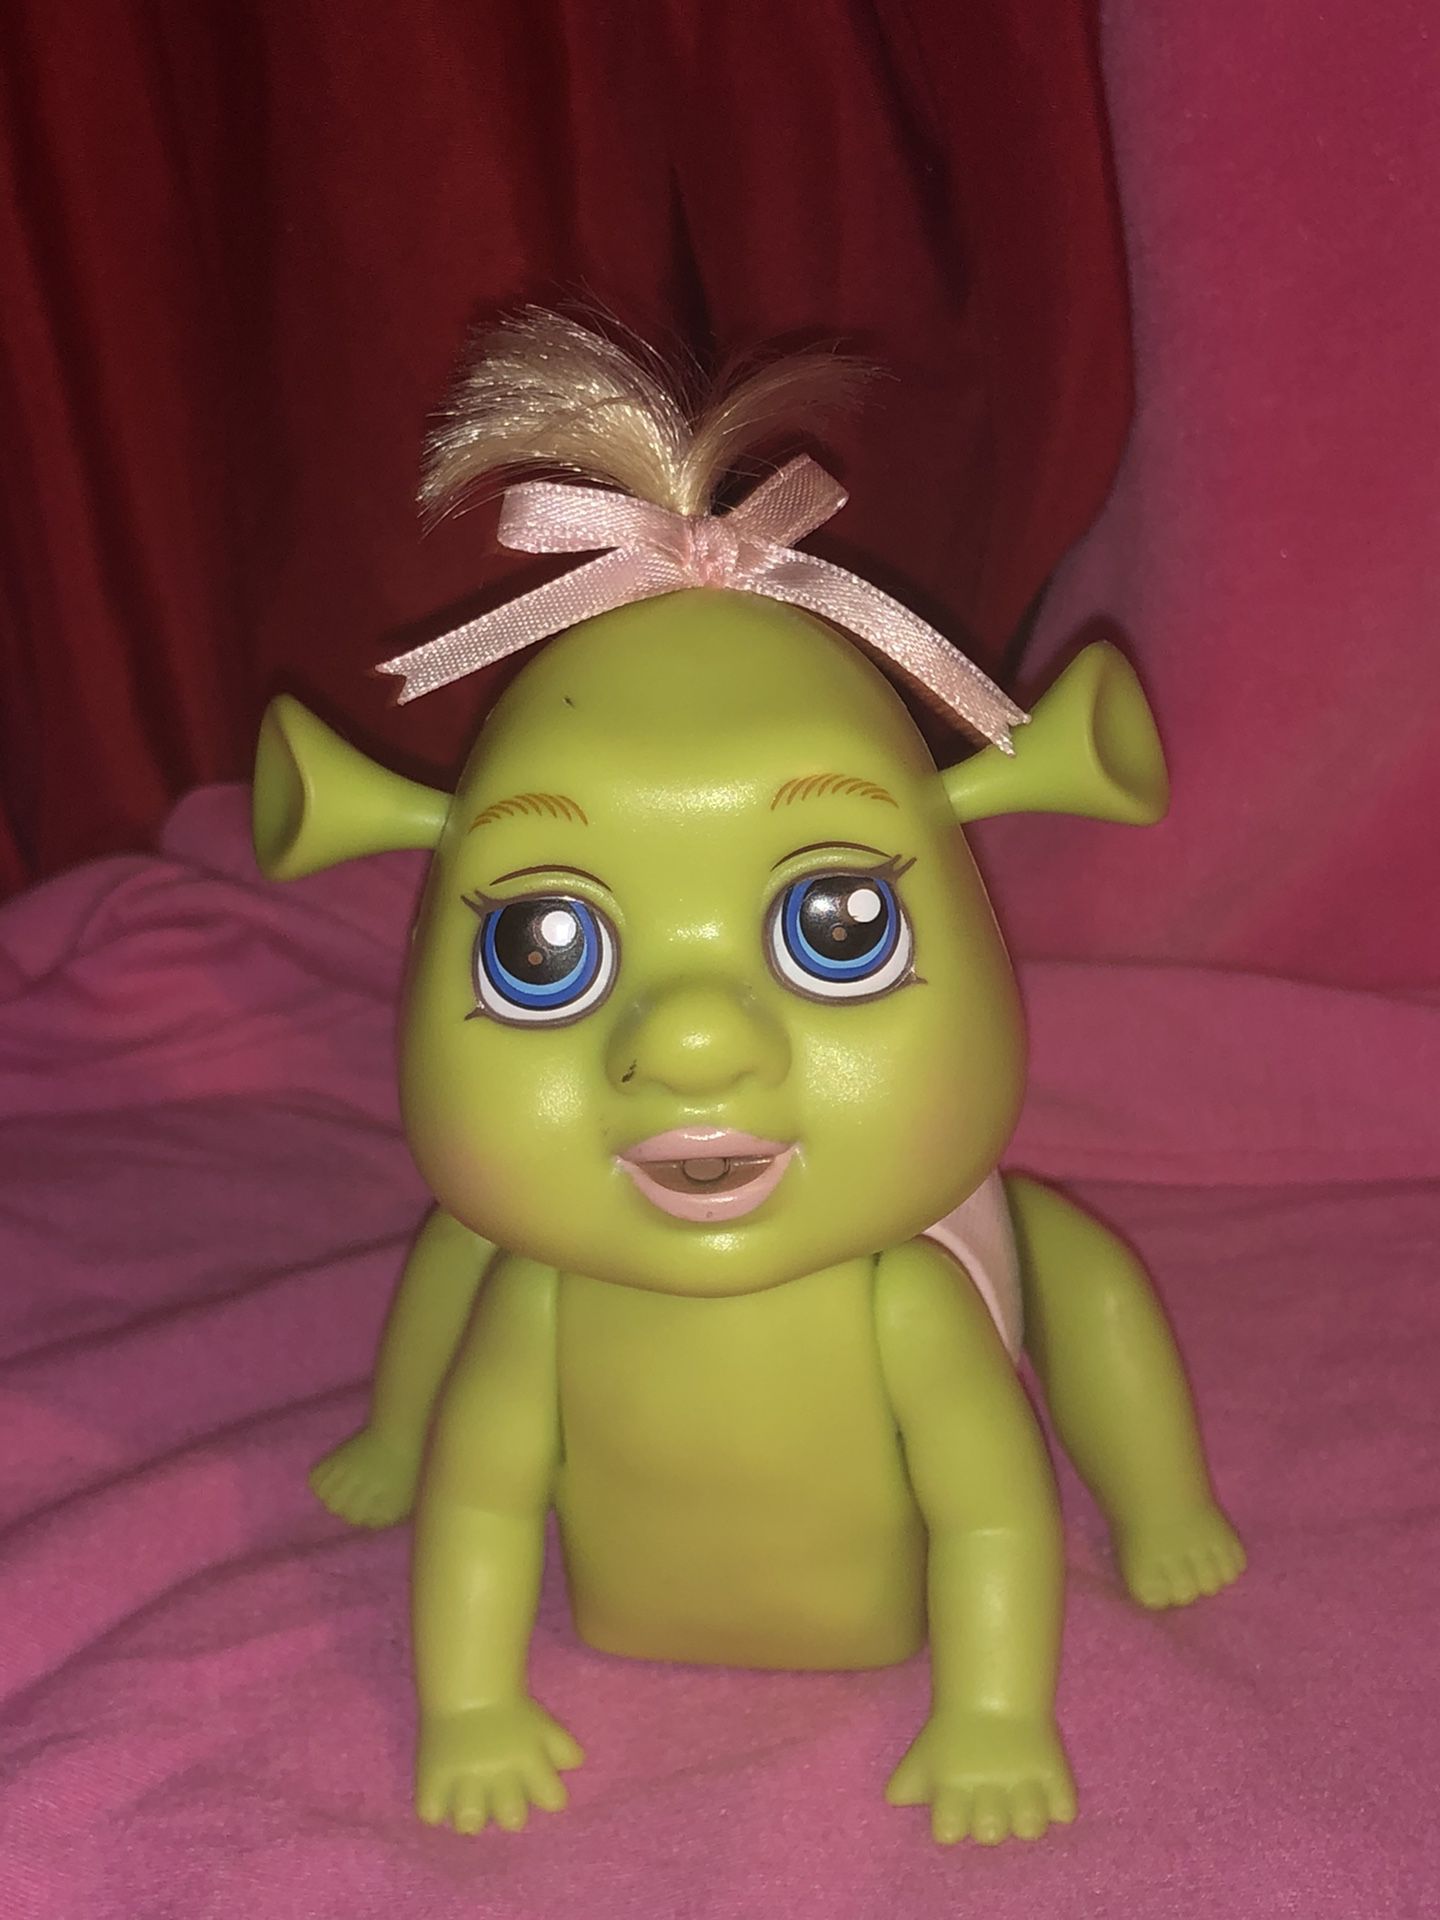 Shrek Fiona baby crawling toy - battery operated ! Hard to find Dream Works toy! Princess Fiona!